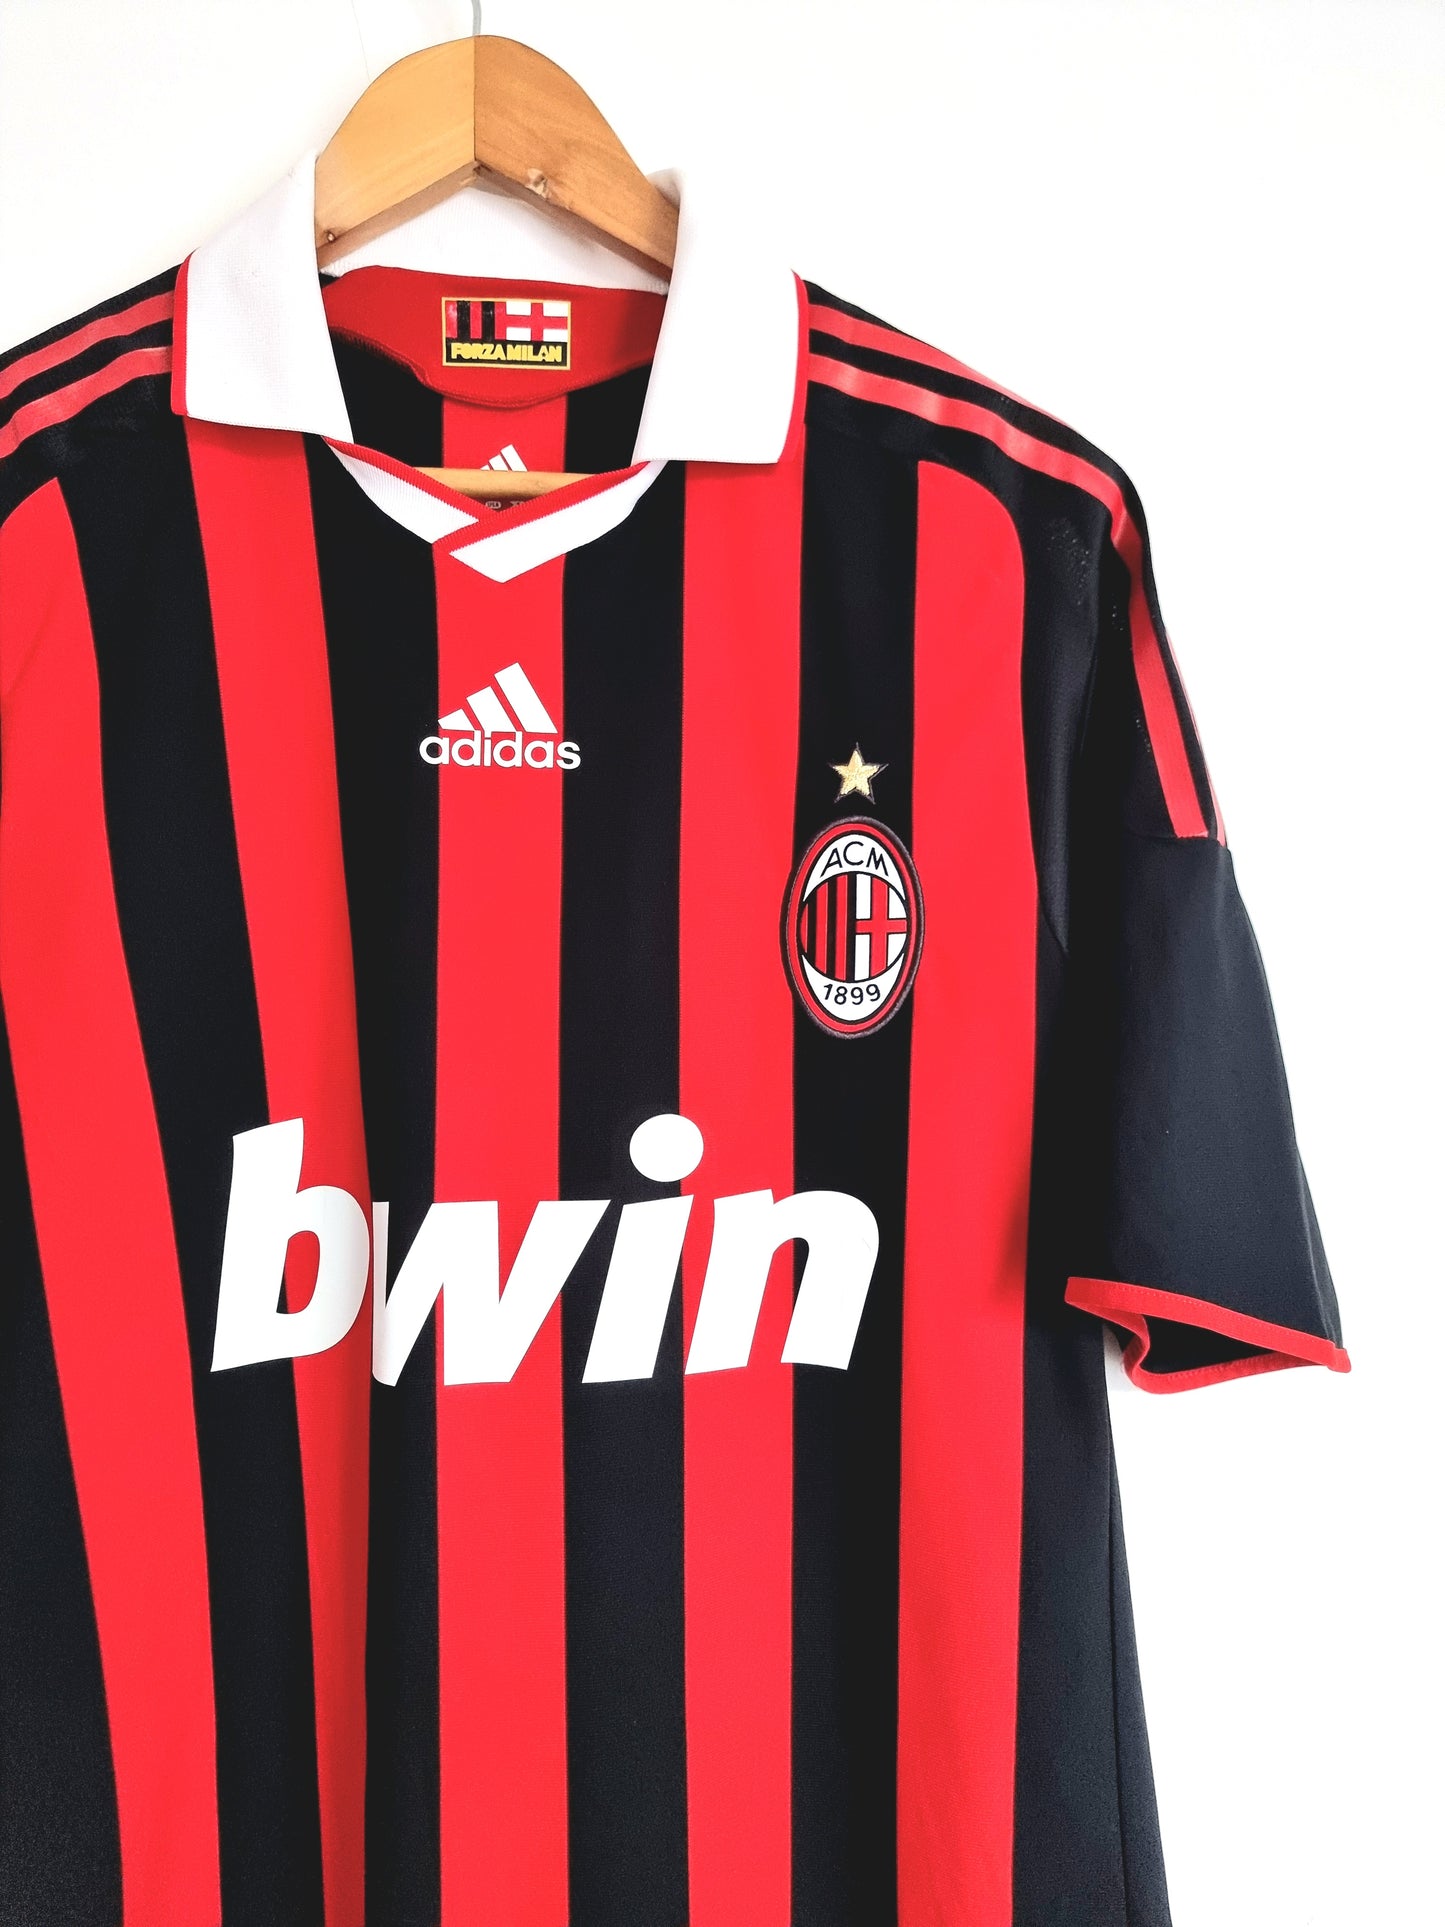 Adidas Formotion AC Milan 09/10 '20 (Abate)' Player Issue Home Shirt Large